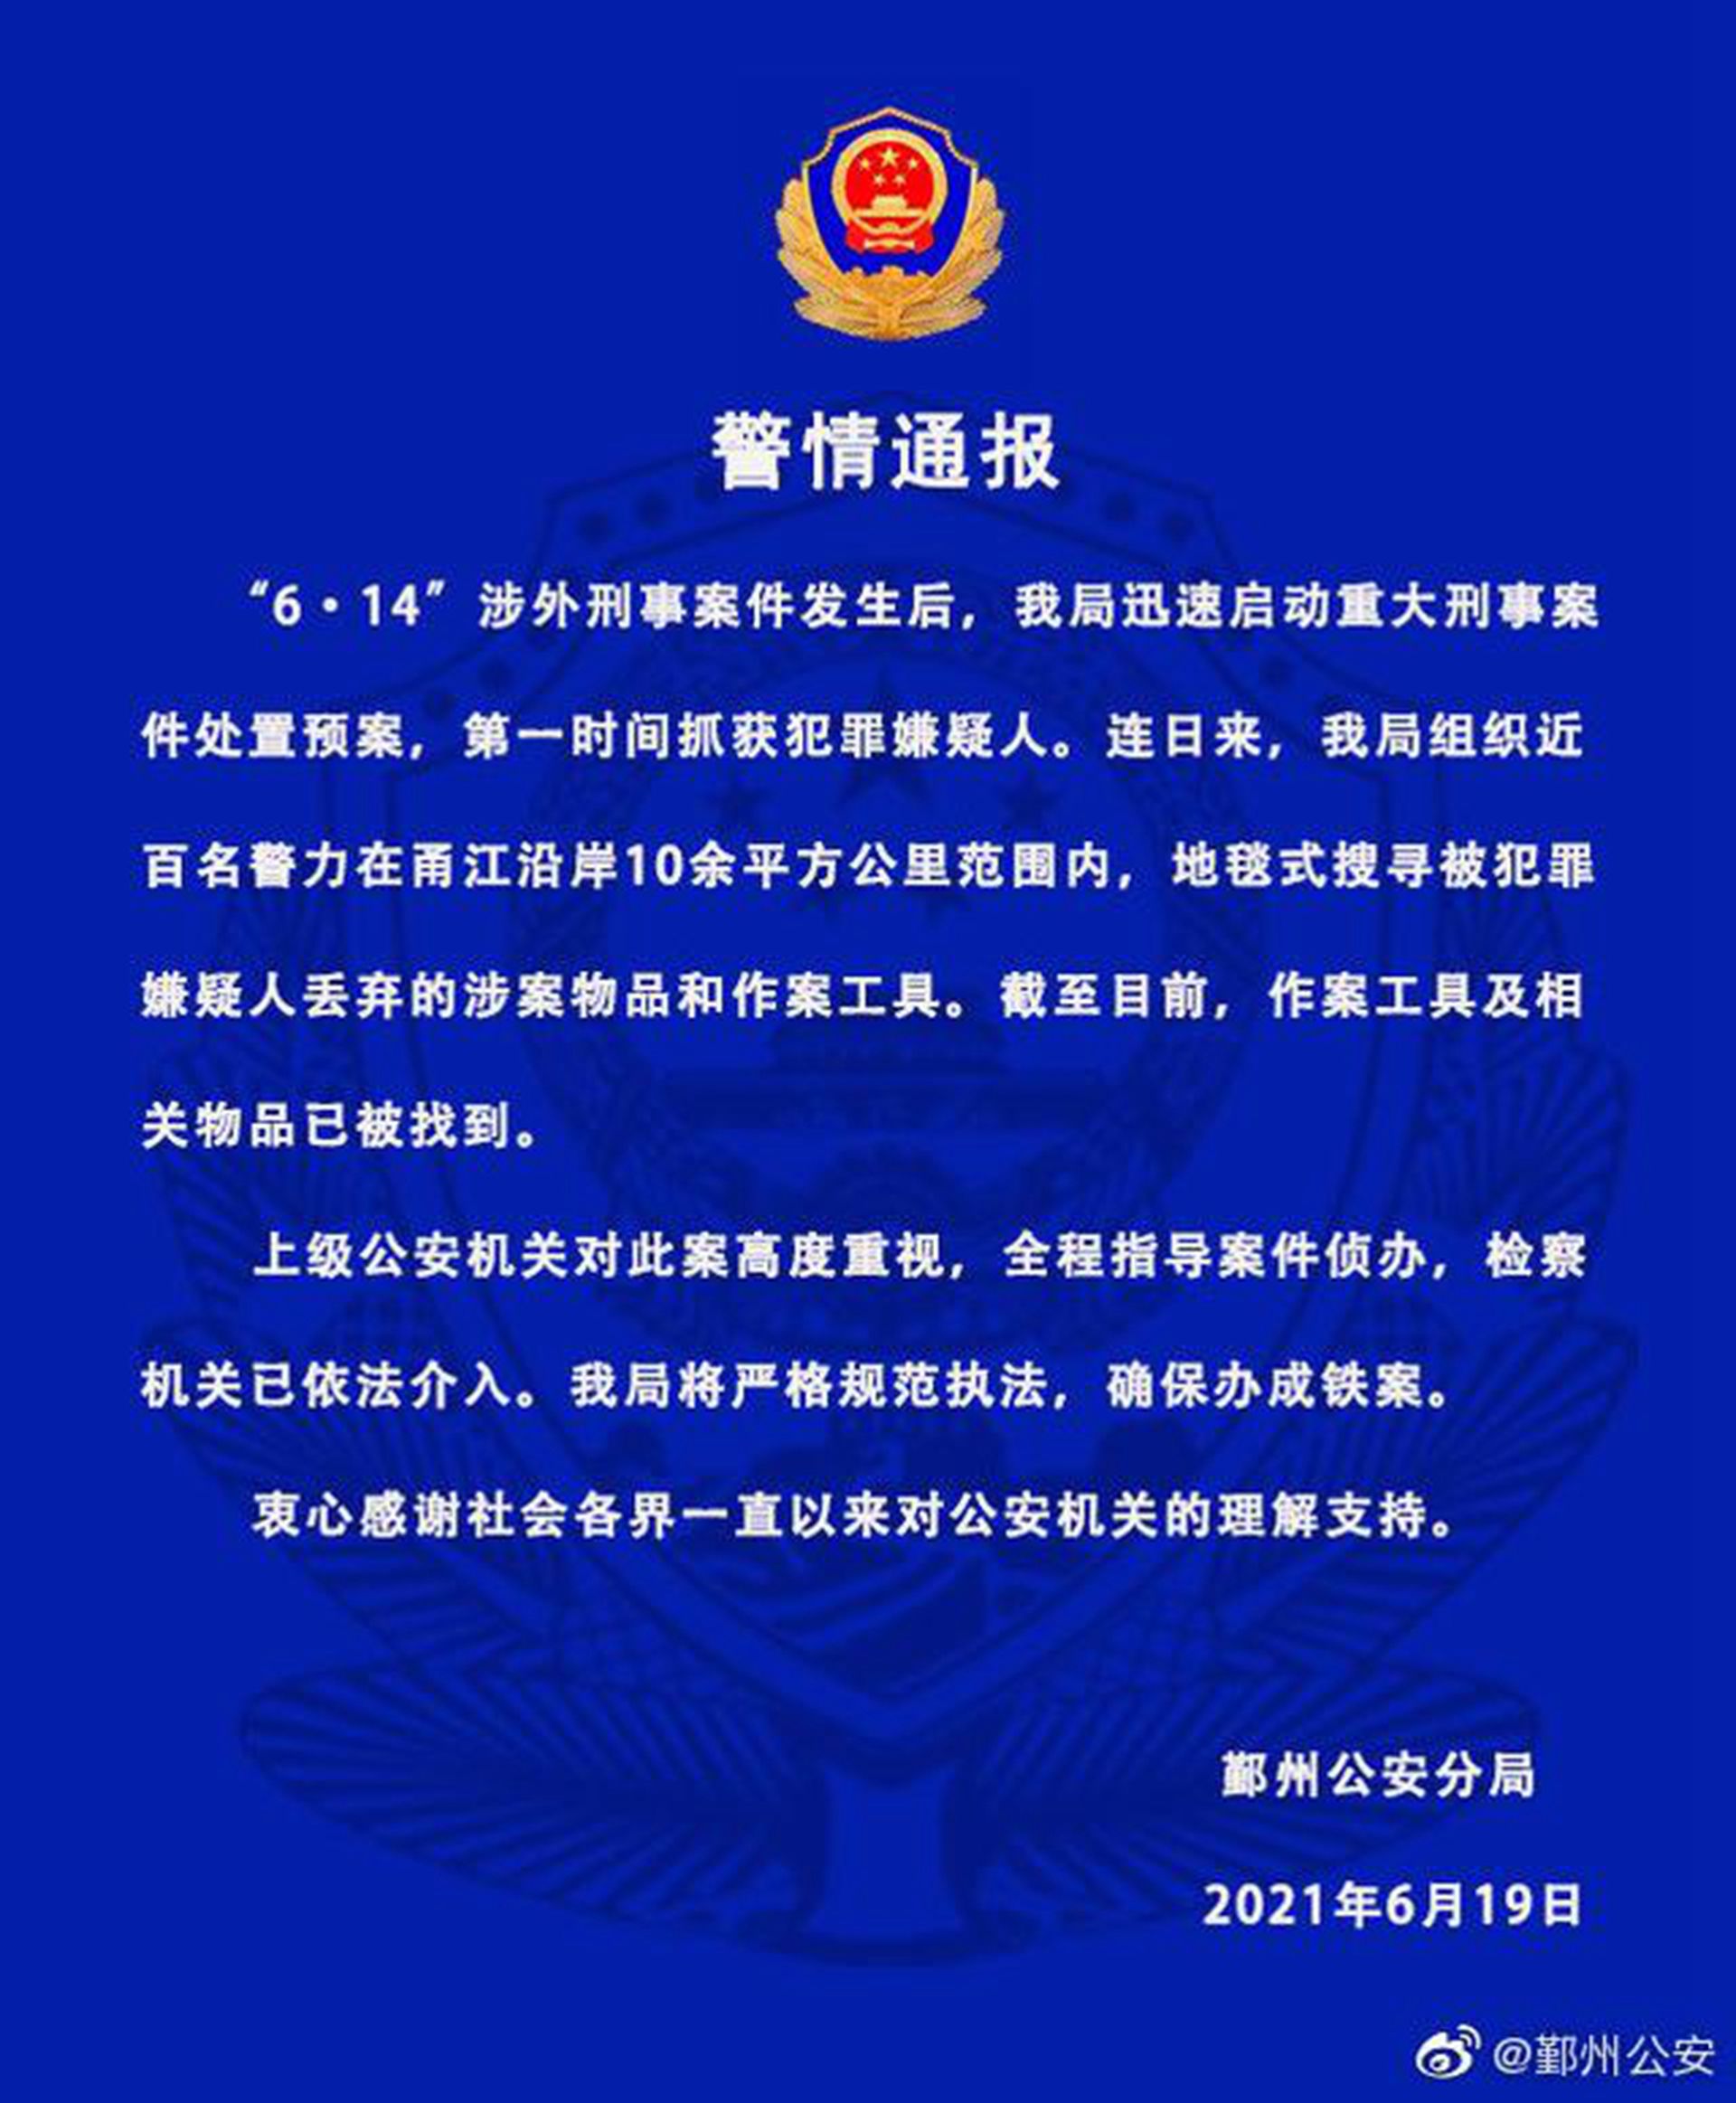 On June 19, Ningbo State Public Security Bureau issued another notice to ensure that it has been Pleated. ( Weibo @Nium State Public Security)